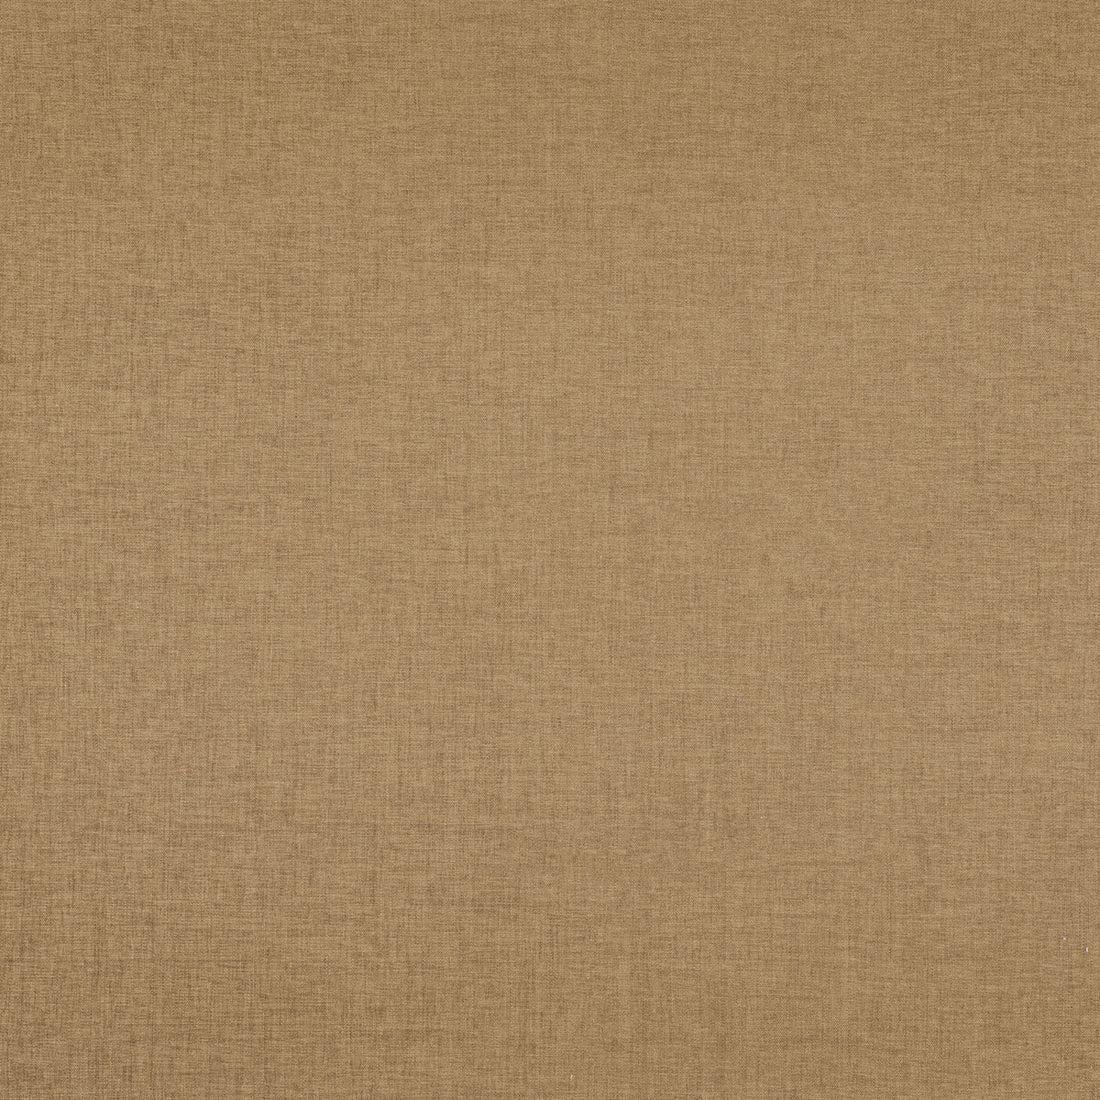 Kravet Smart fabric in 36095-116 color - pattern 36095.116.0 - by Kravet Smart in the Eco-Friendly Chenille collection